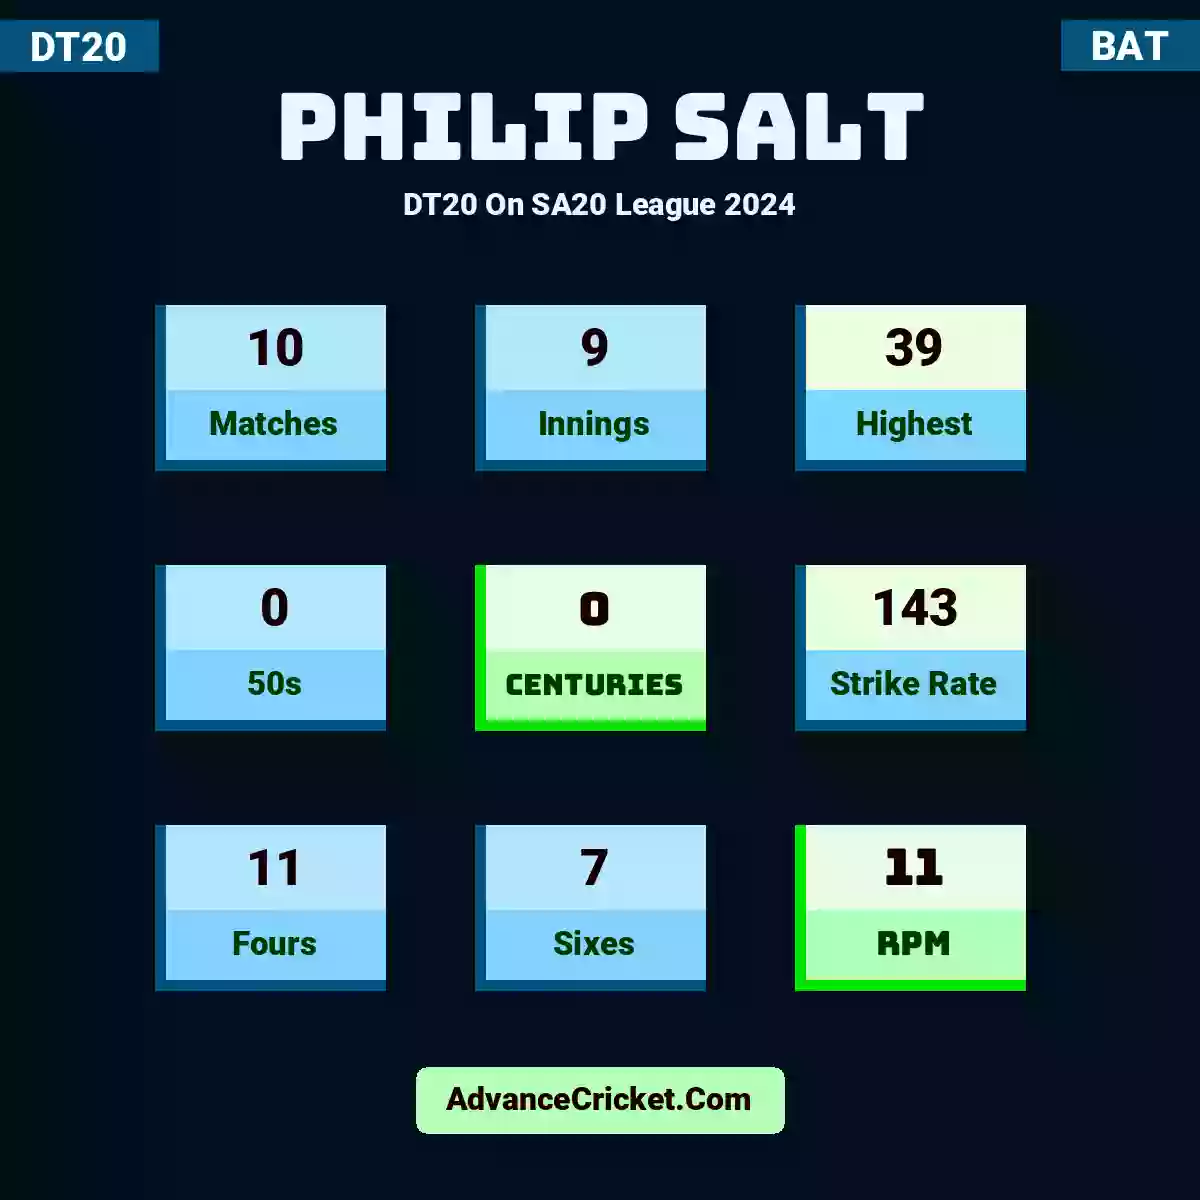 Philip Salt DT20  On SA20 League 2024, Philip Salt played 10 matches, scored 39 runs as highest, 0 half-centuries, and 0 centuries, with a strike rate of 143. P.Salt hit 11 fours and 7 sixes, with an RPM of 11.